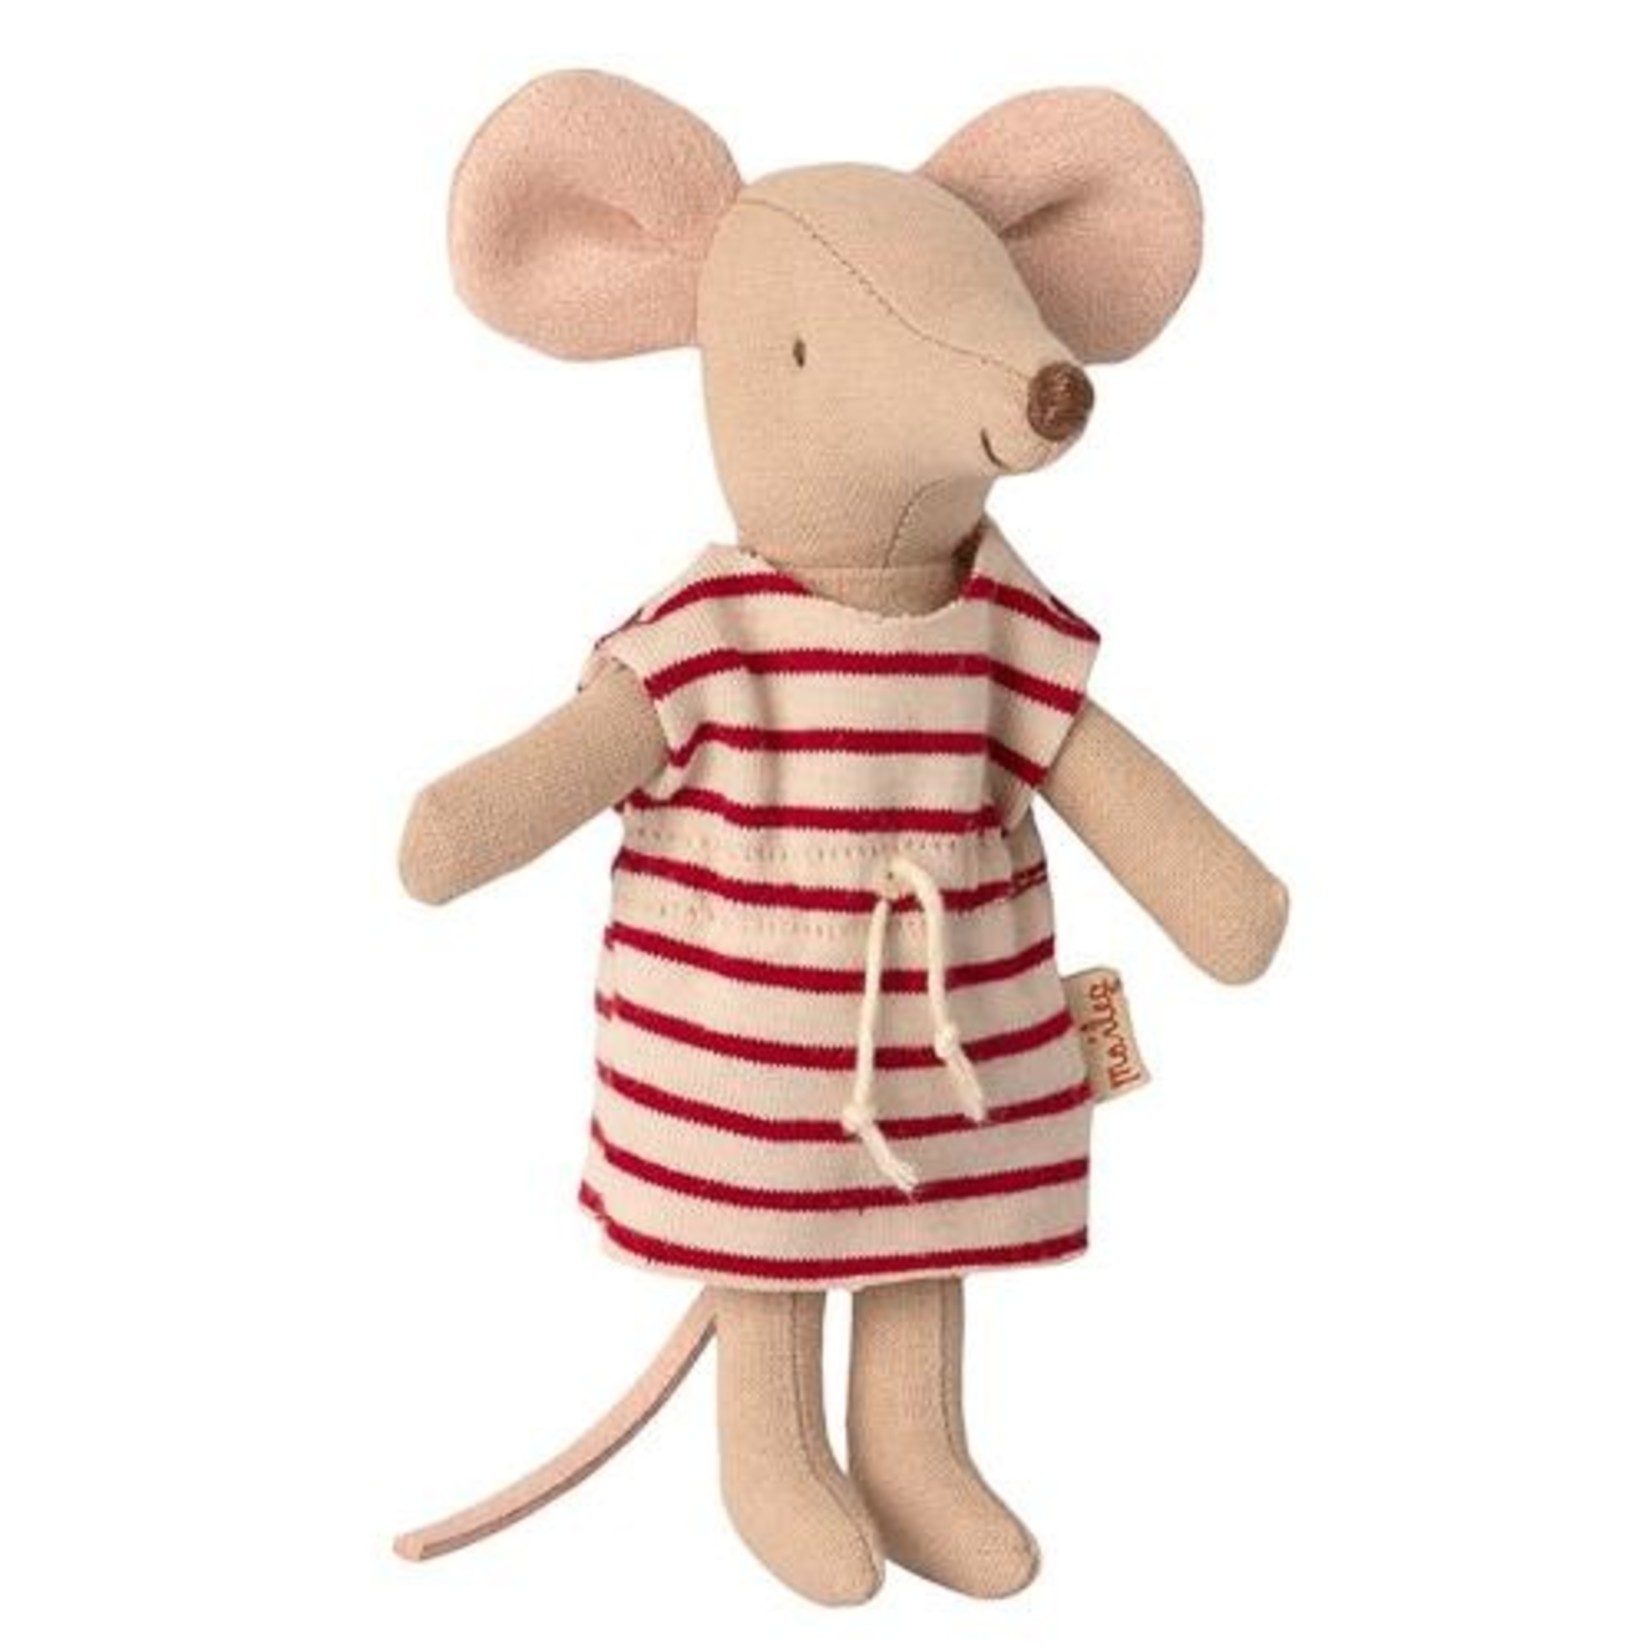 Maileg USA Big Sister Mouse in Matchbox